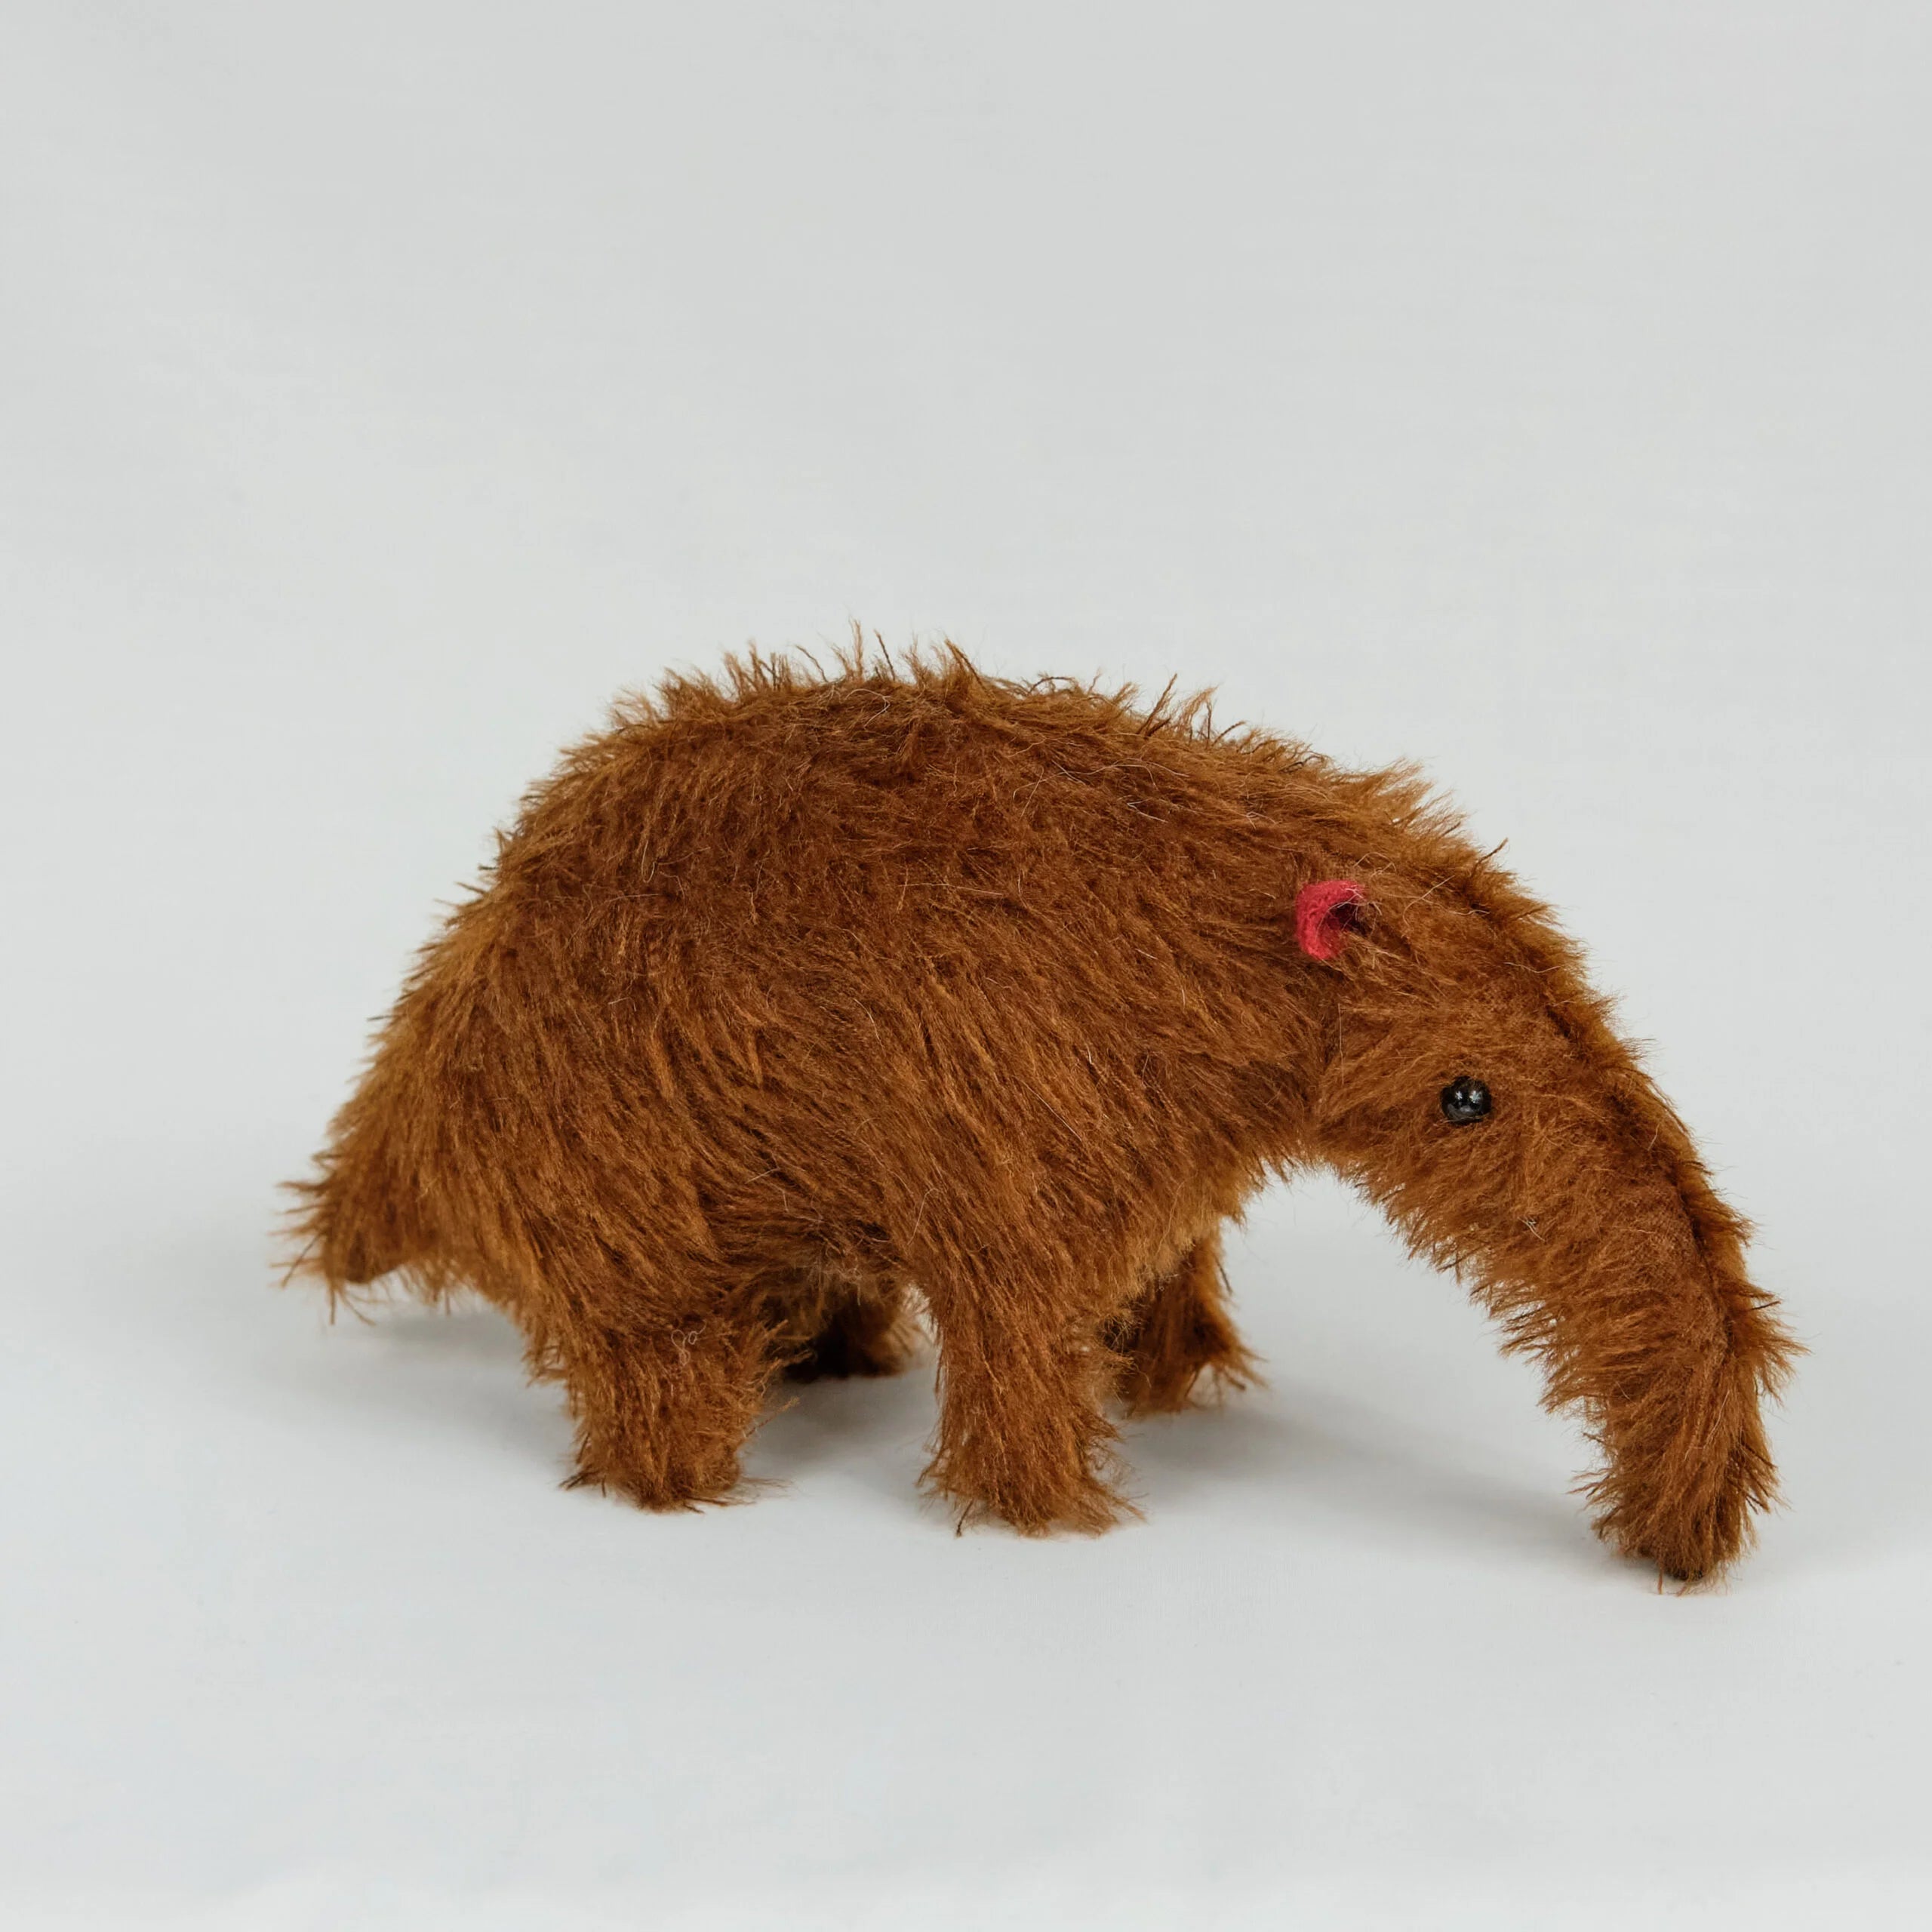 Gladys The Handmade Anteater from Canterbury Bears.